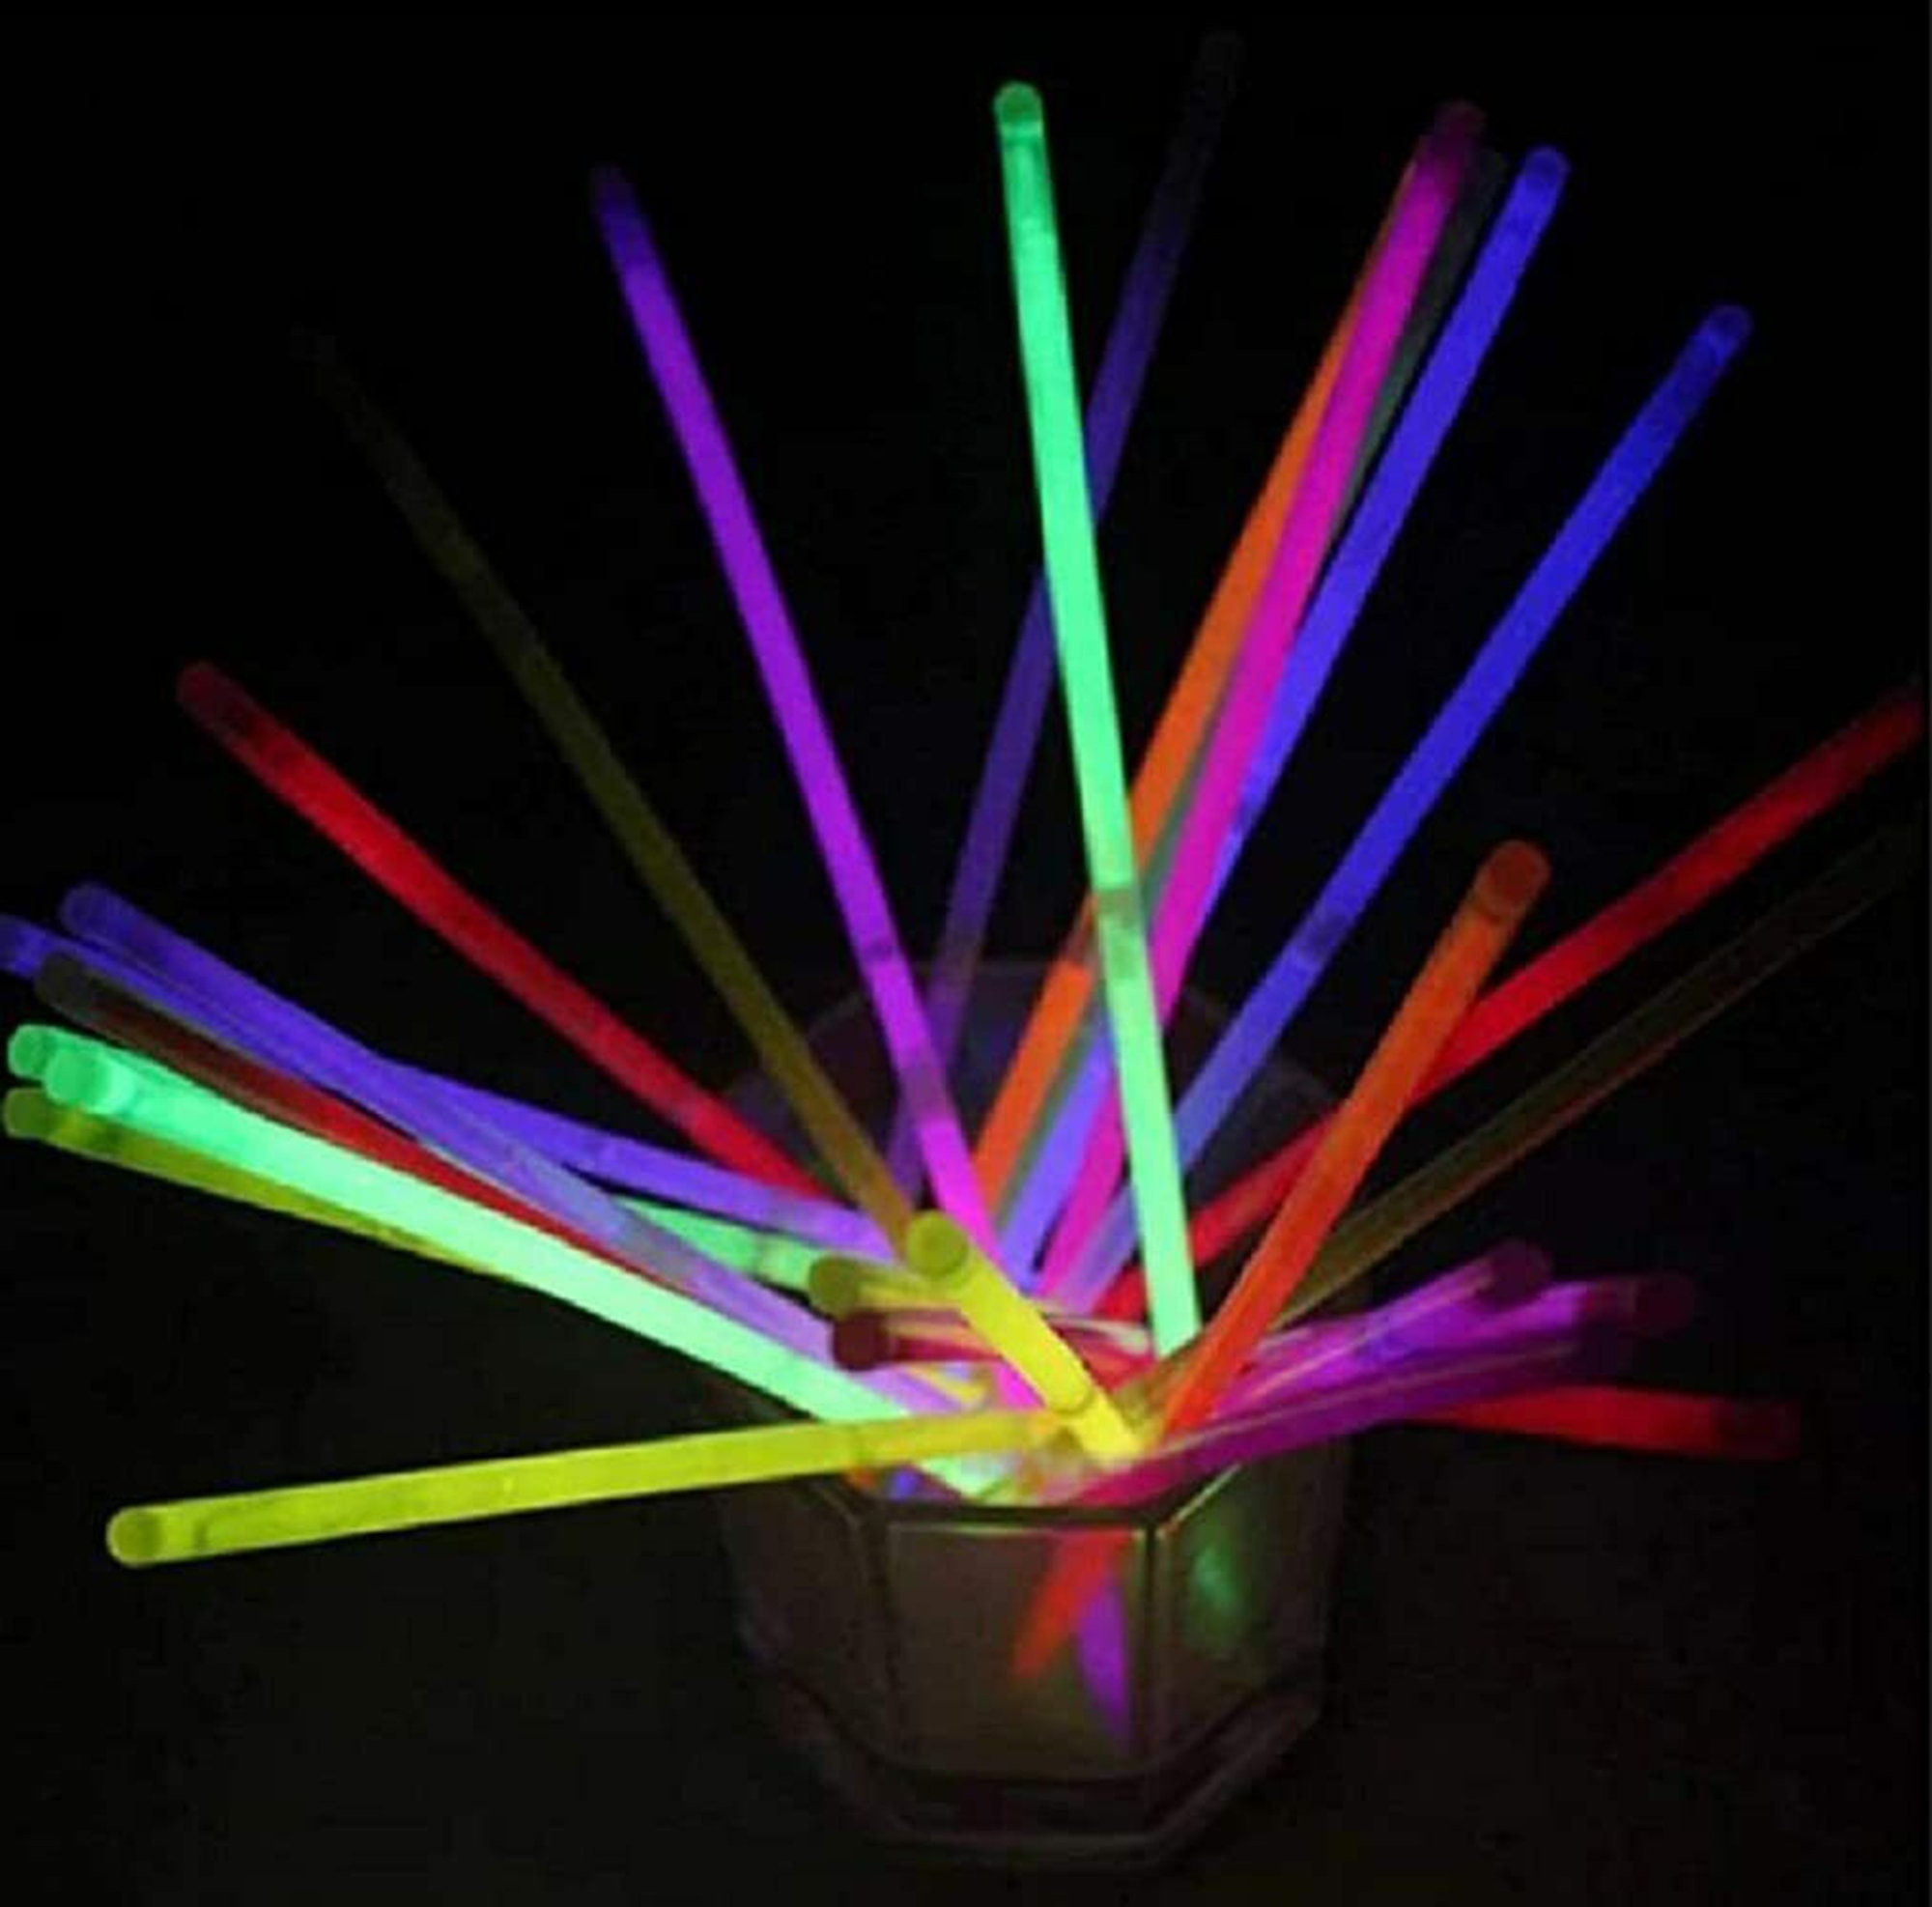 Glowstick Wedding Exit Ideas 8 Inch Glow in the Dark Light Up Sticks Glow  Neon Party Decorations Favors with Connectors